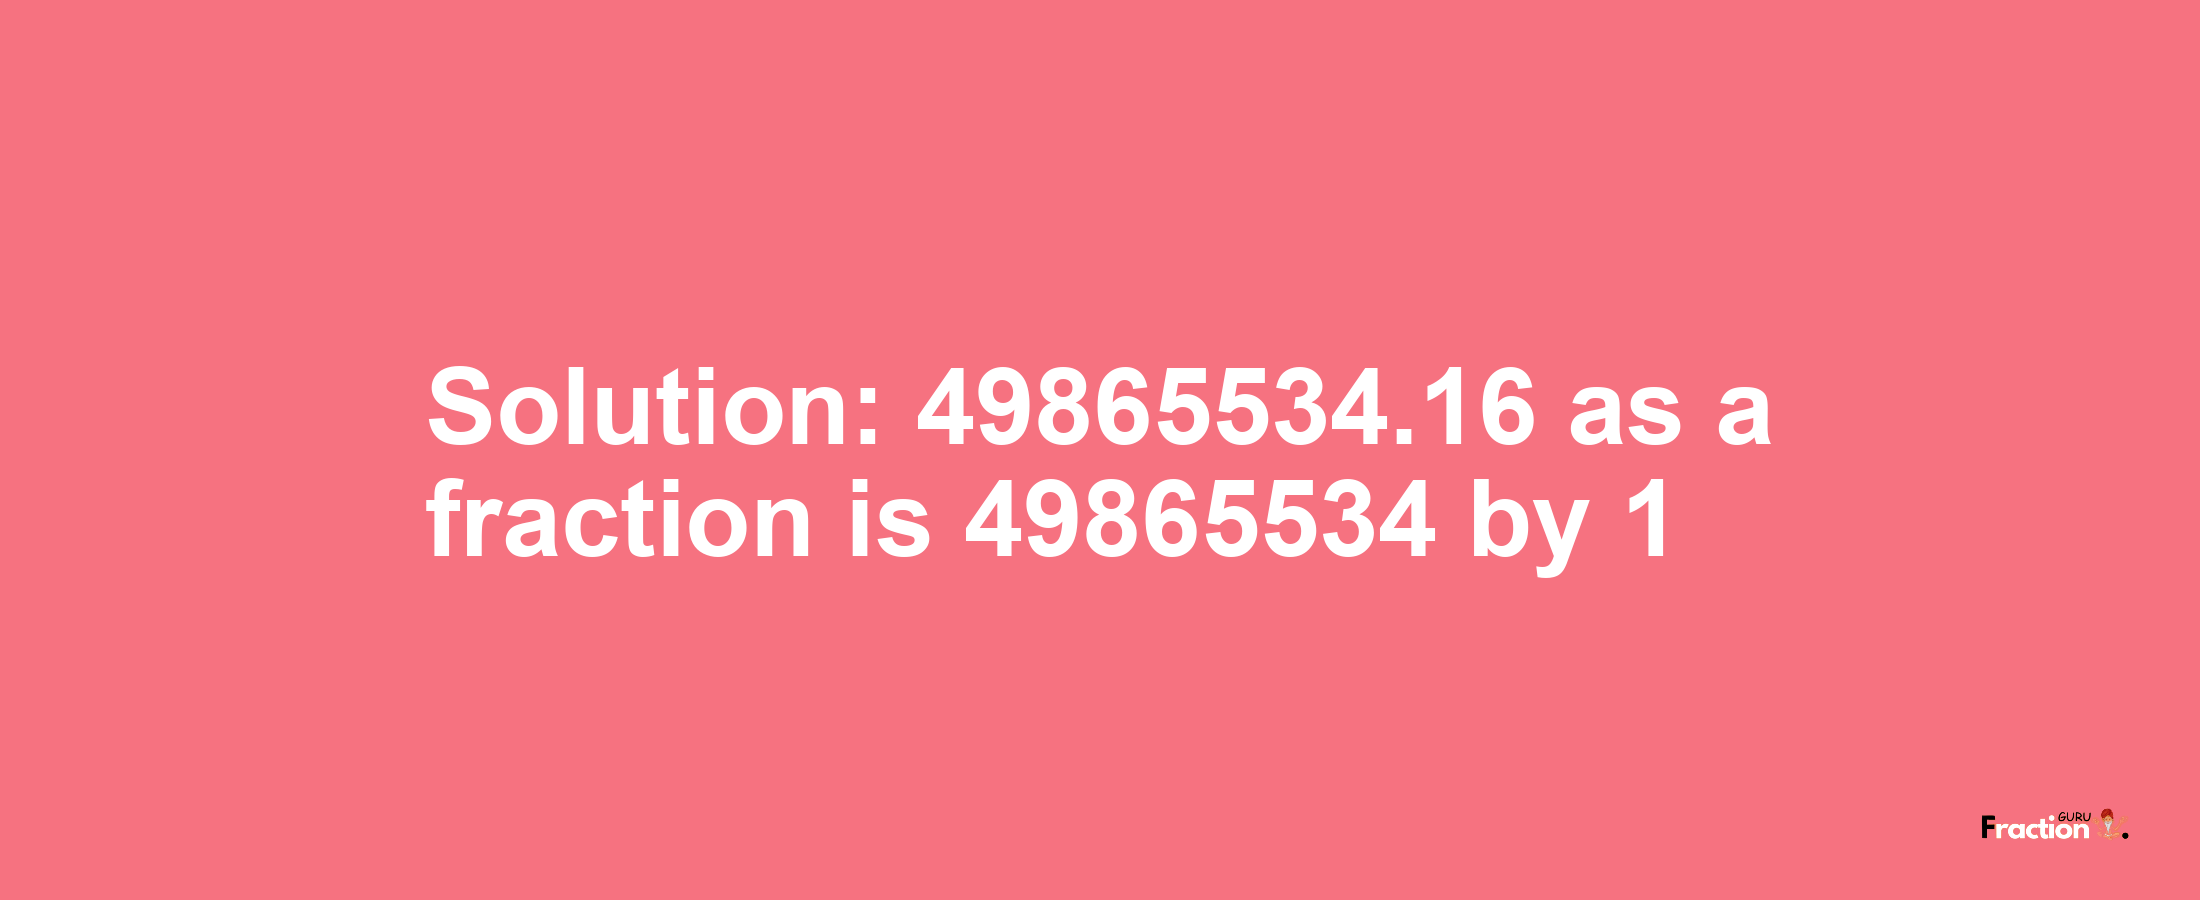 Solution:49865534.16 as a fraction is 49865534/1